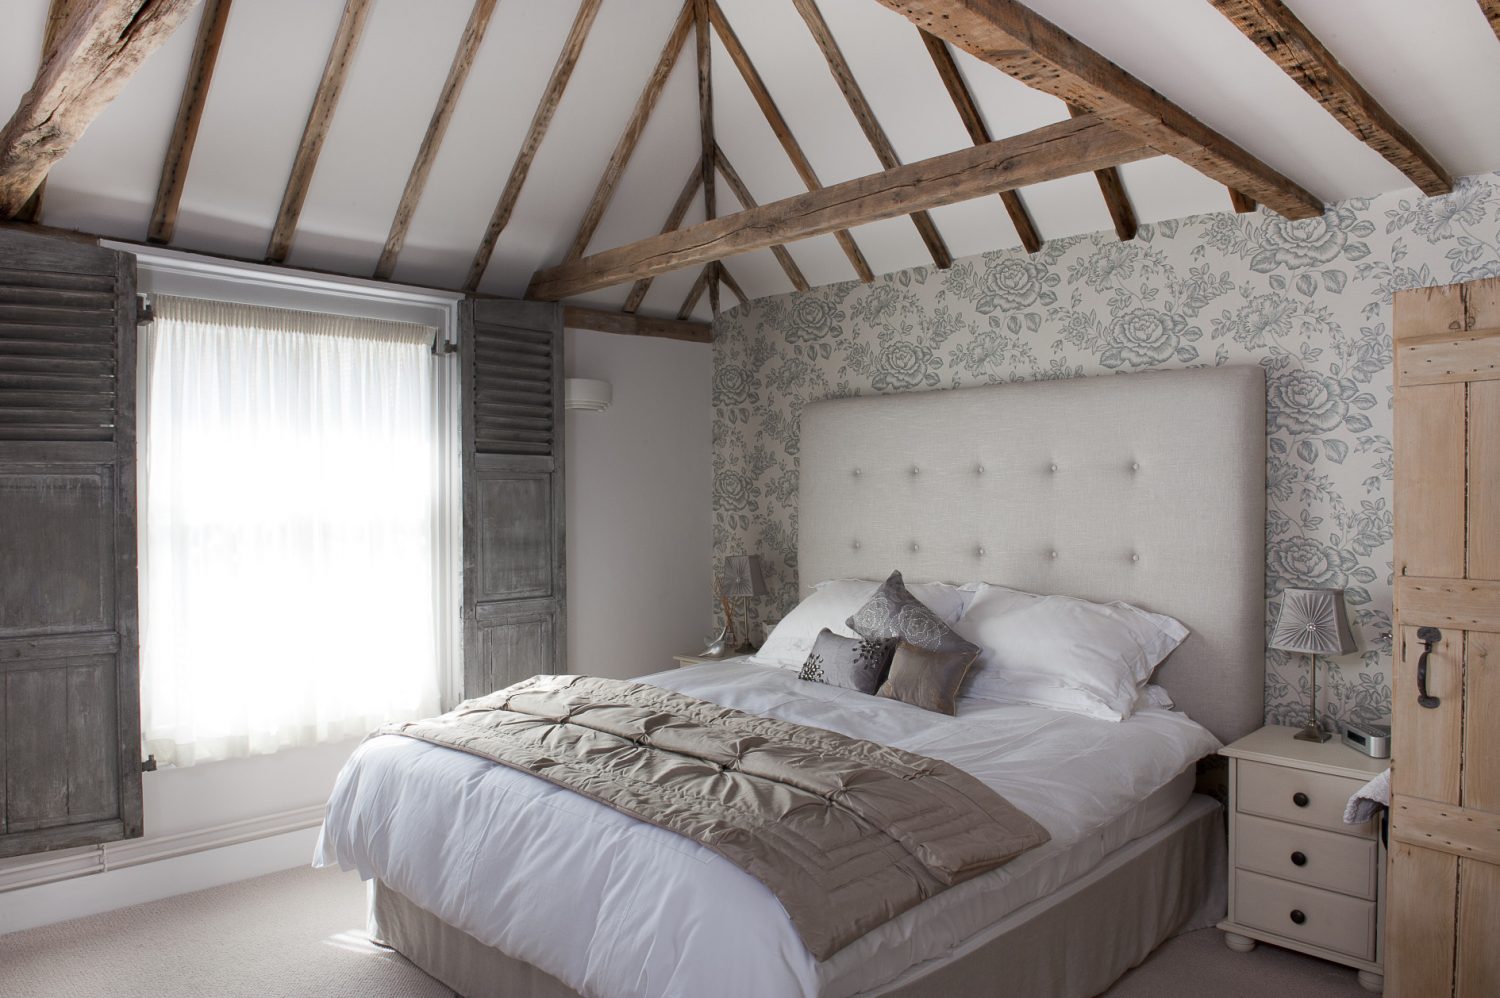 In the glamorous master bedroom a bed dressed with cotton and satin bedclothes is set against a feature wall of Sanderson wallpaper. Plain muslin is draped across the window for privacy during the day and a pair of working shutters with louvred panels can be drawn across at night